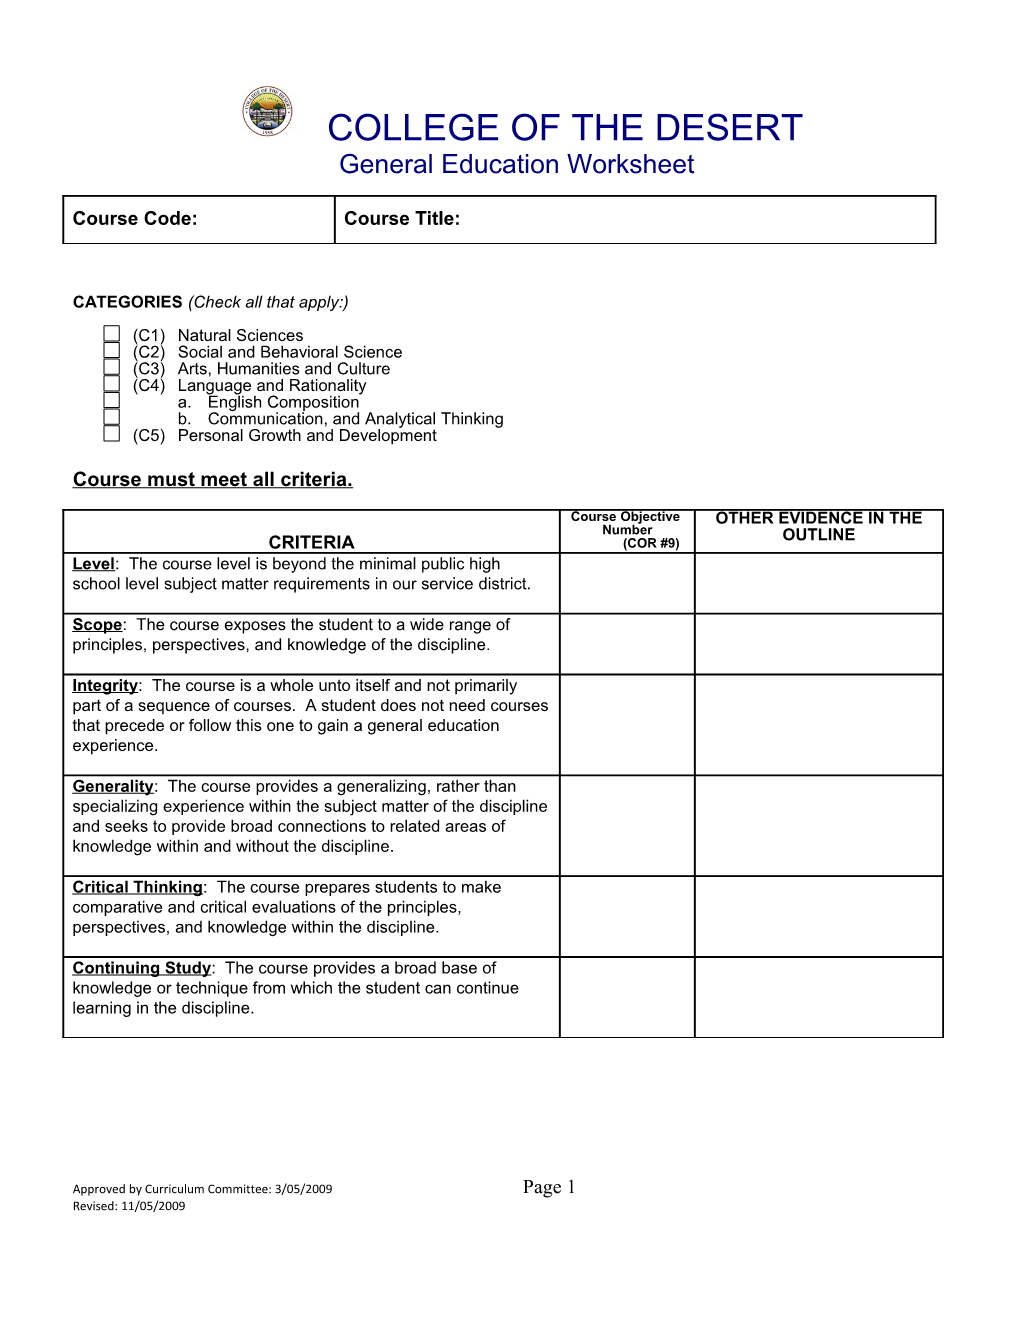 College of the Desert General Education Category Definitions Worksheet